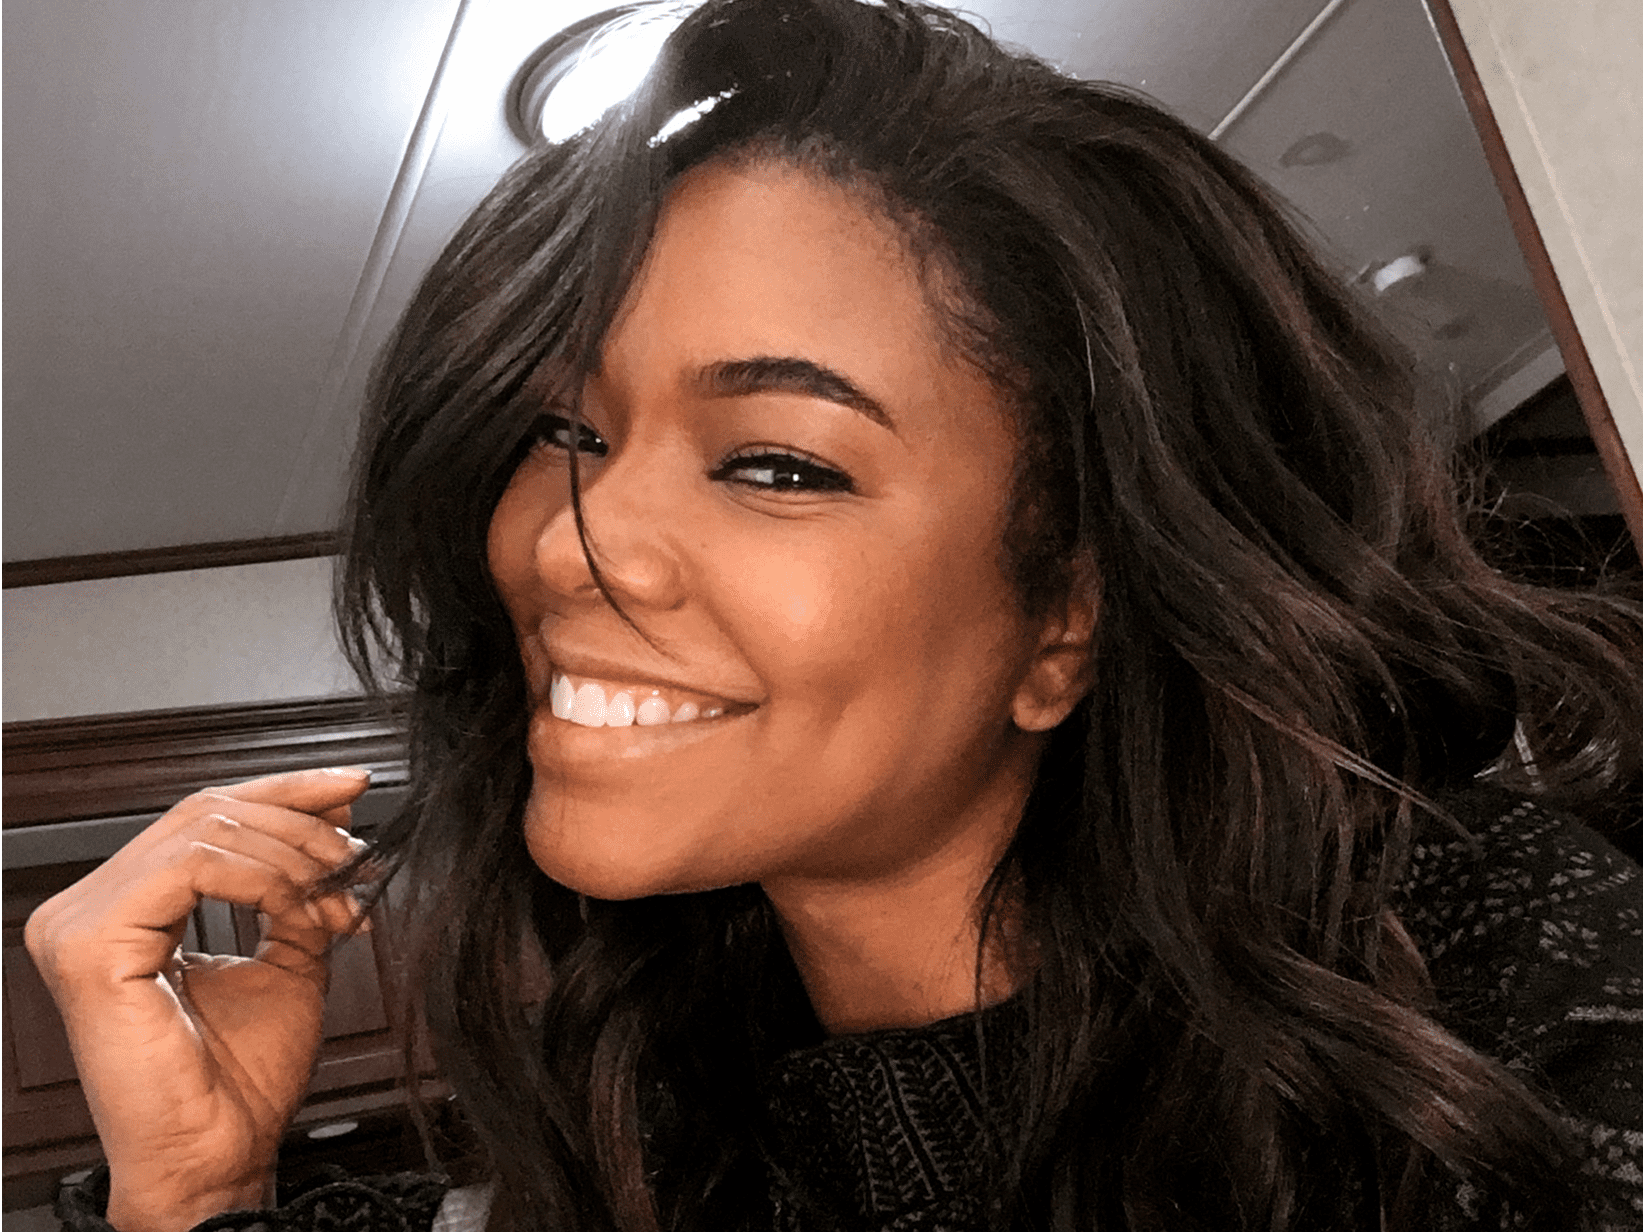 Gabrielle Union Will Soon Share Baby Kaavia James' Opinion With The World